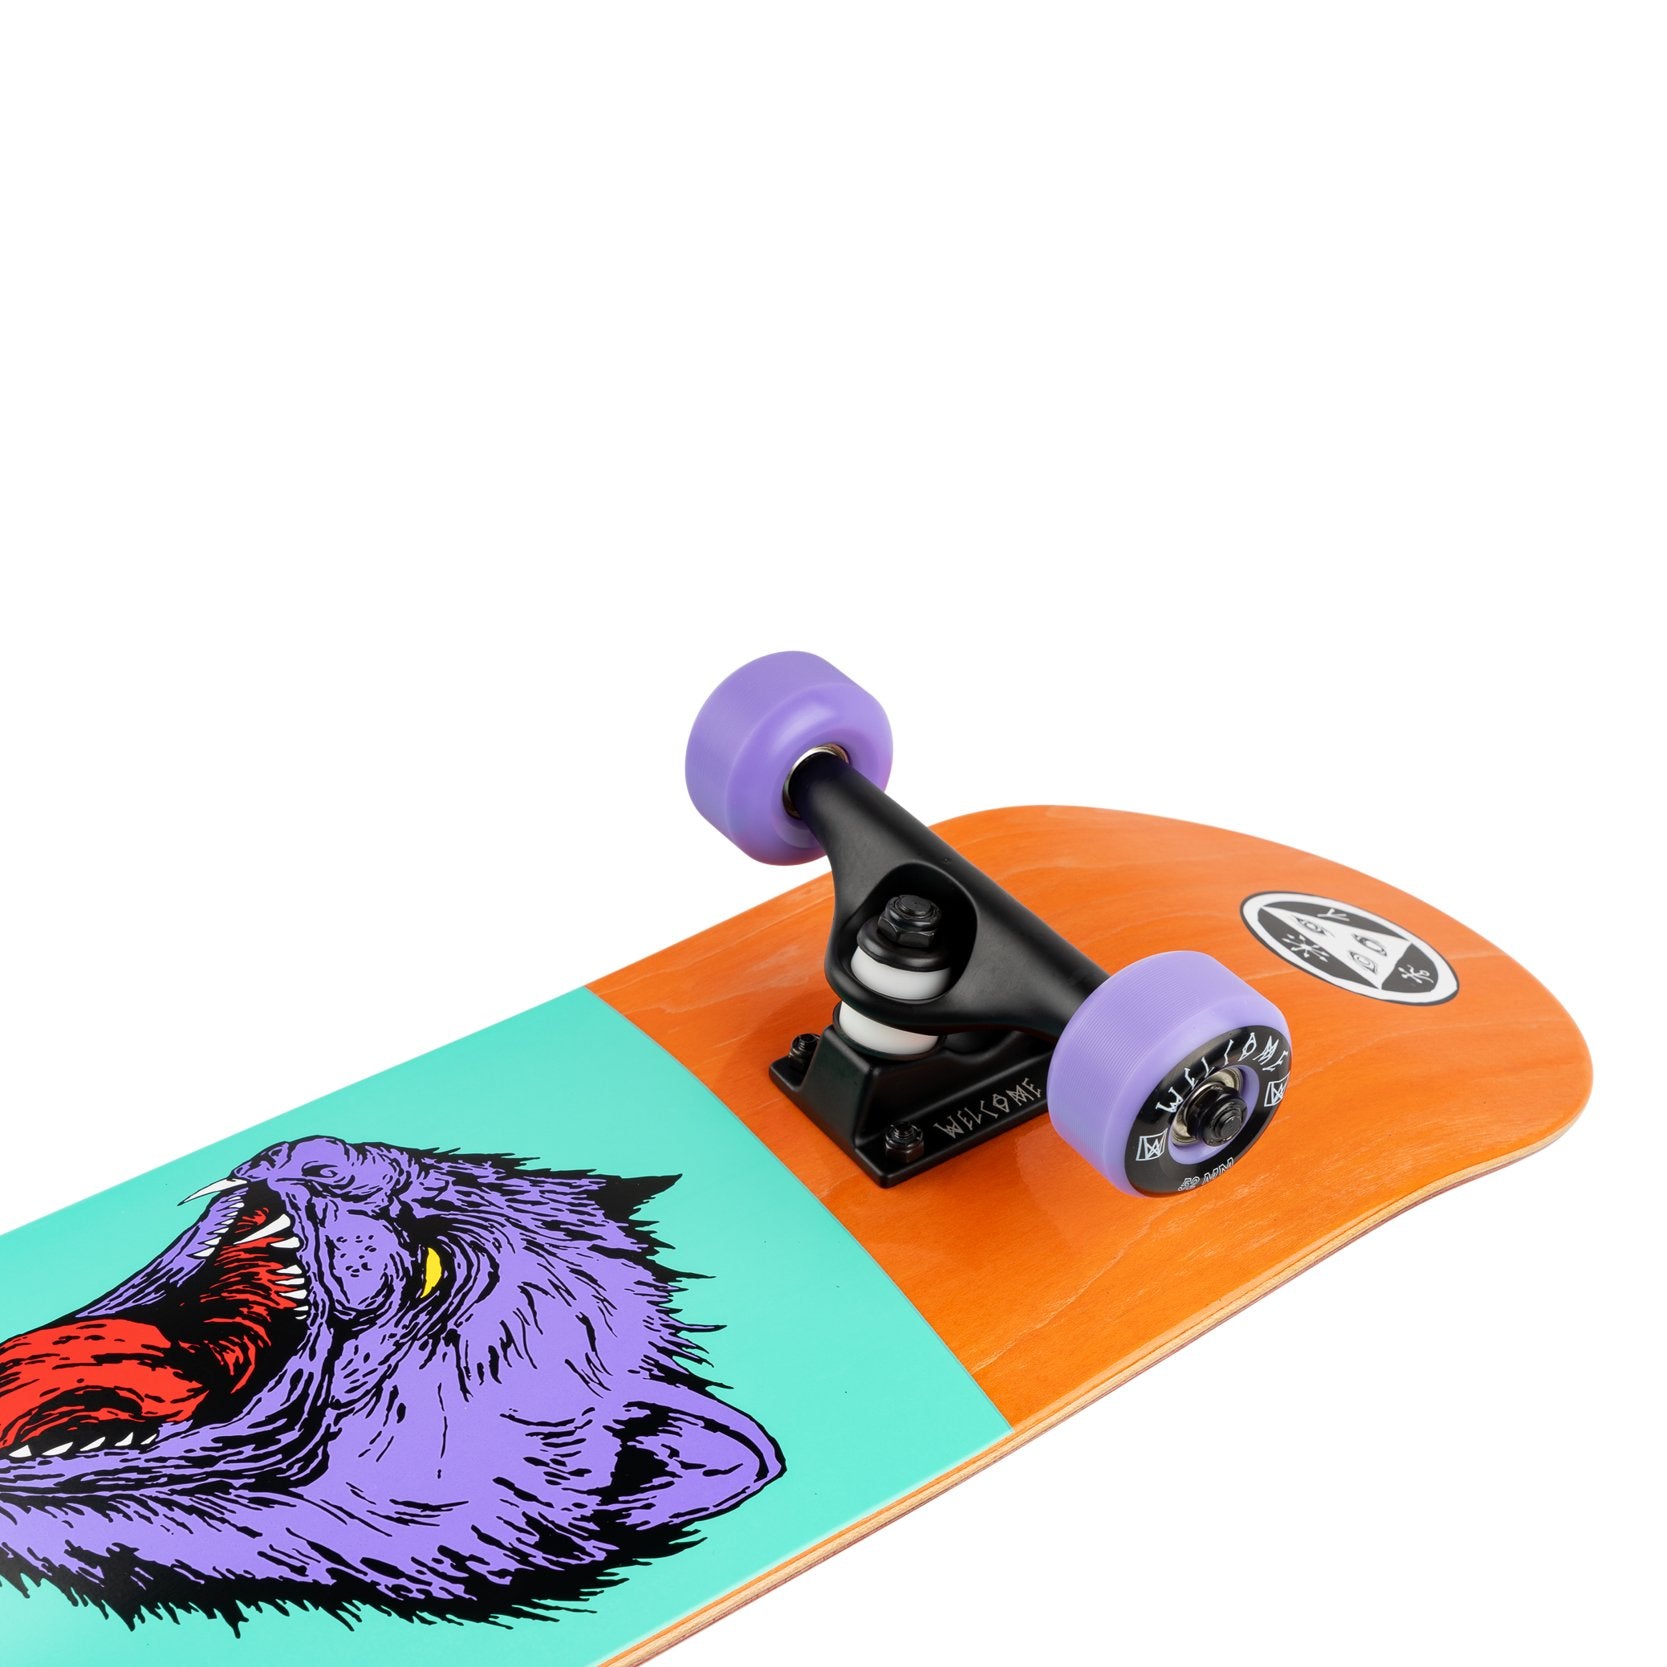 WELCOME COMPLETE - TASMANIAN ANGEL ORANGE STAIN (7.75&quot;) - The Drive Skateshop